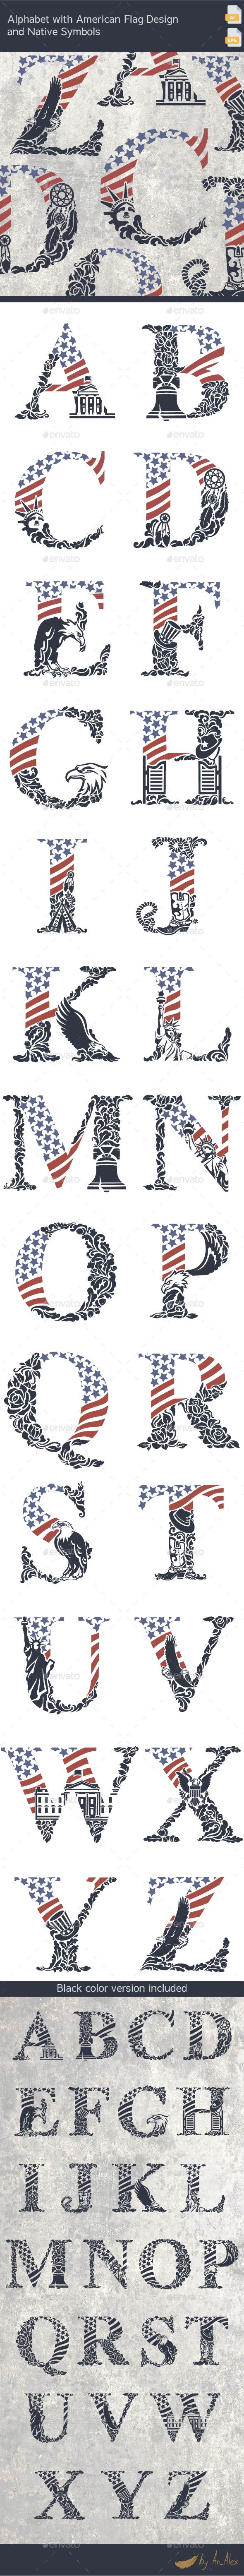 Alphabet with American Flag Design and Native Symbols